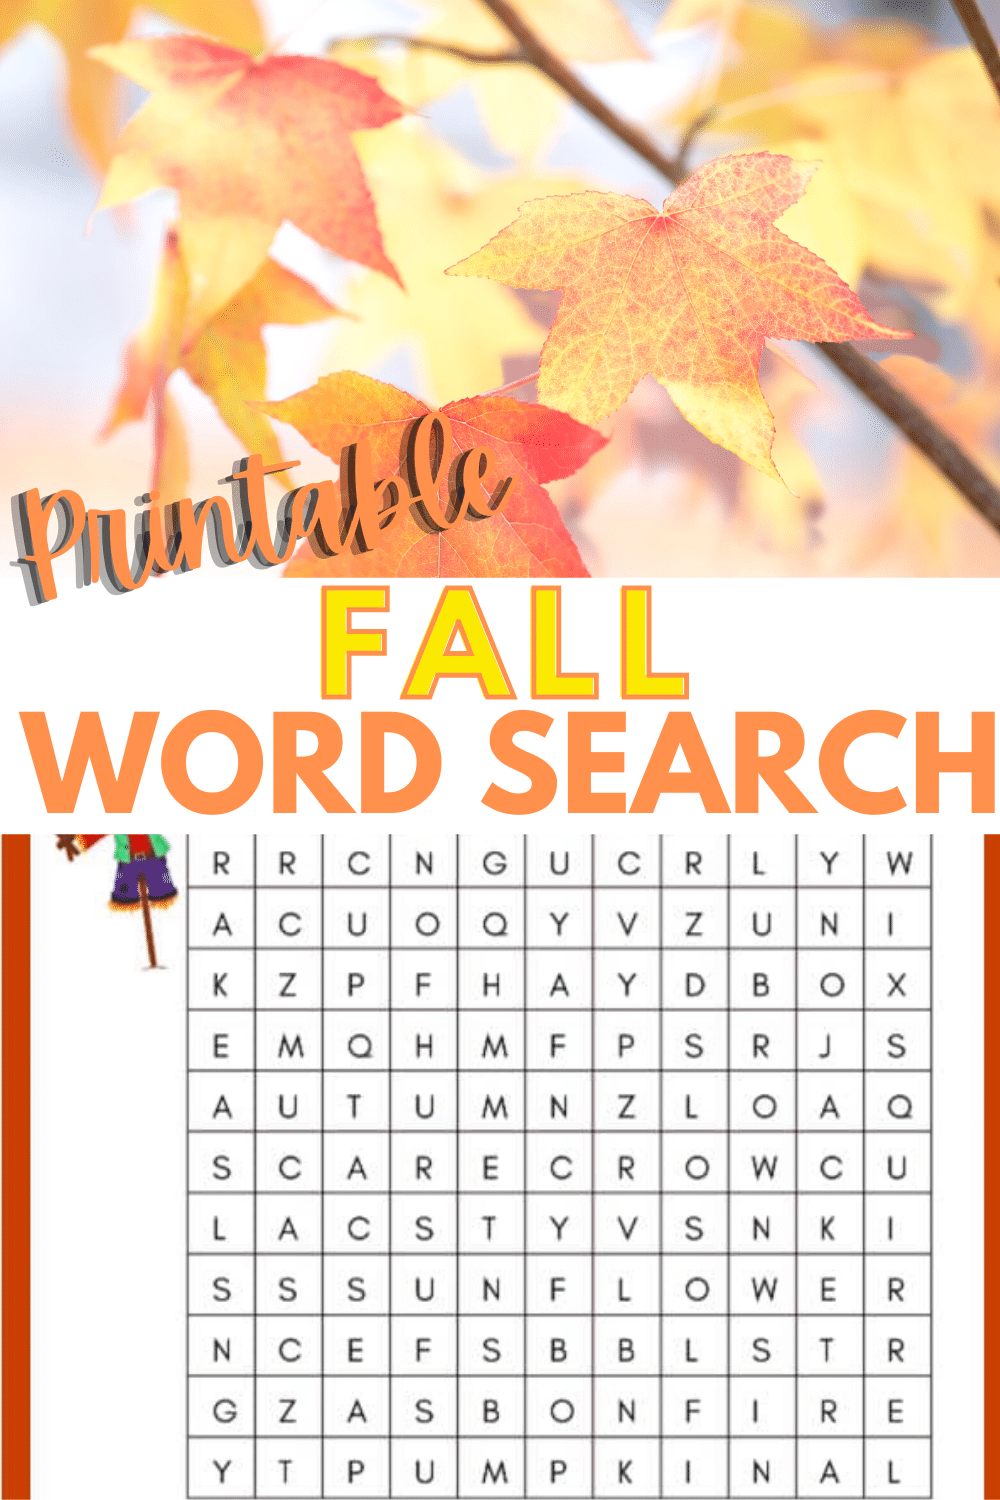 A printable fall word search is a great activity for kids. Full of fall-themed words this is a fun and educational kids printable for home or school. #fall #printables #wordsearch via @wondermomwannab